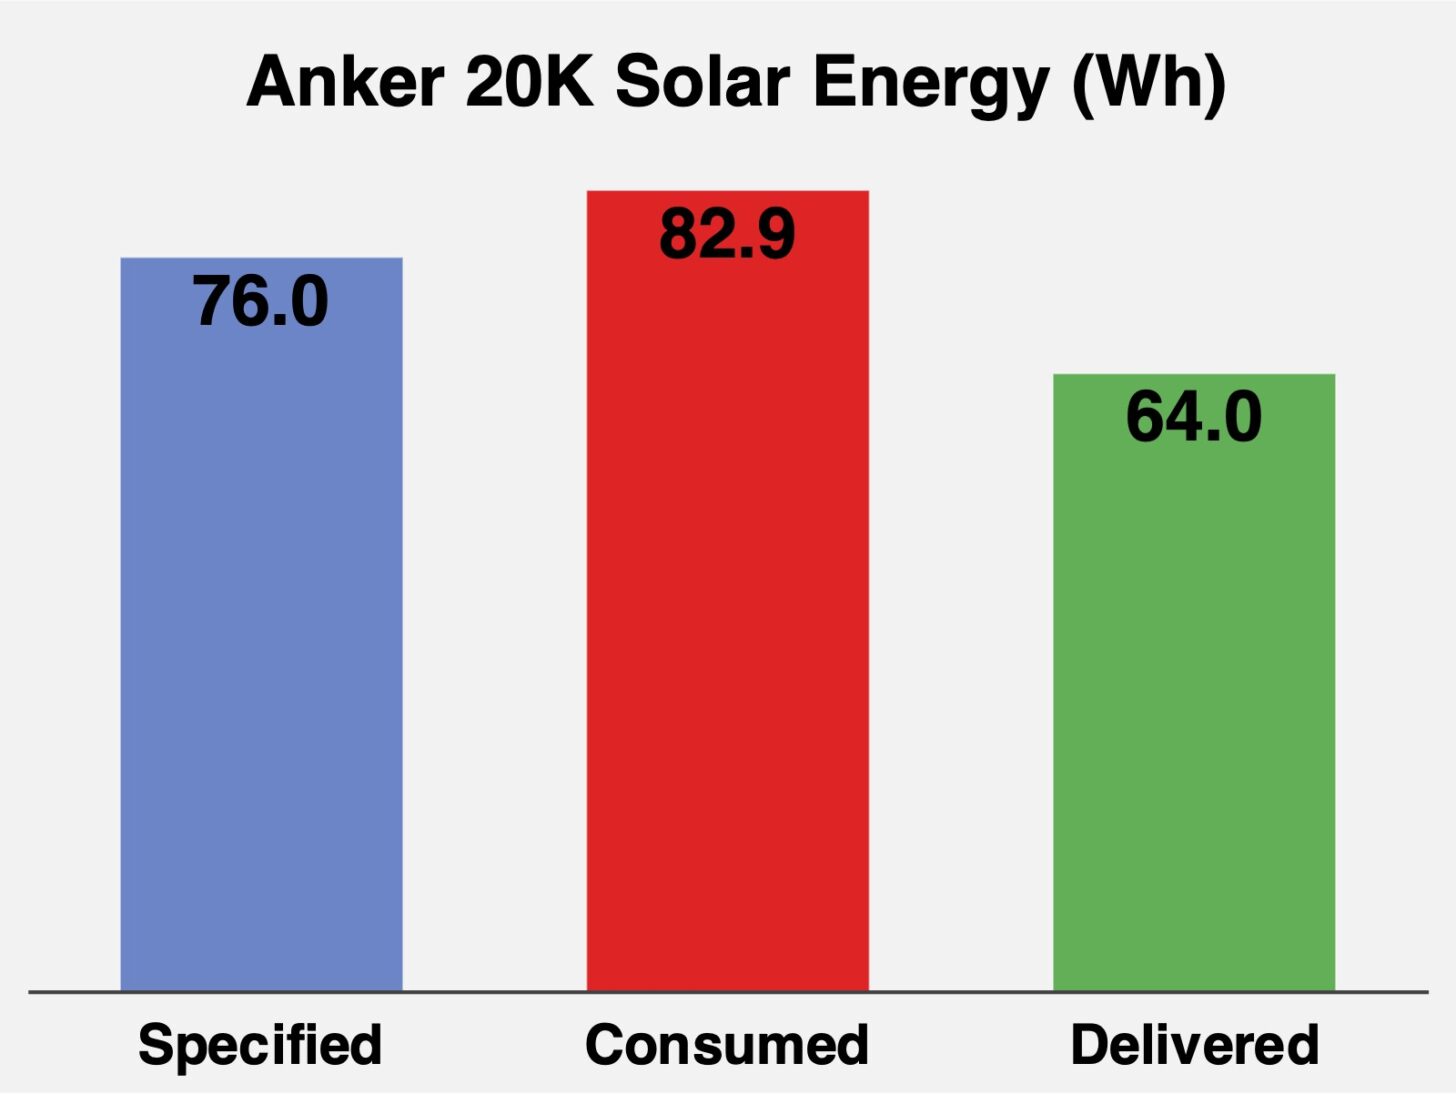 Chart comparing Anker 20K solar specified, consumed, and delivered energy, in watt-hours.